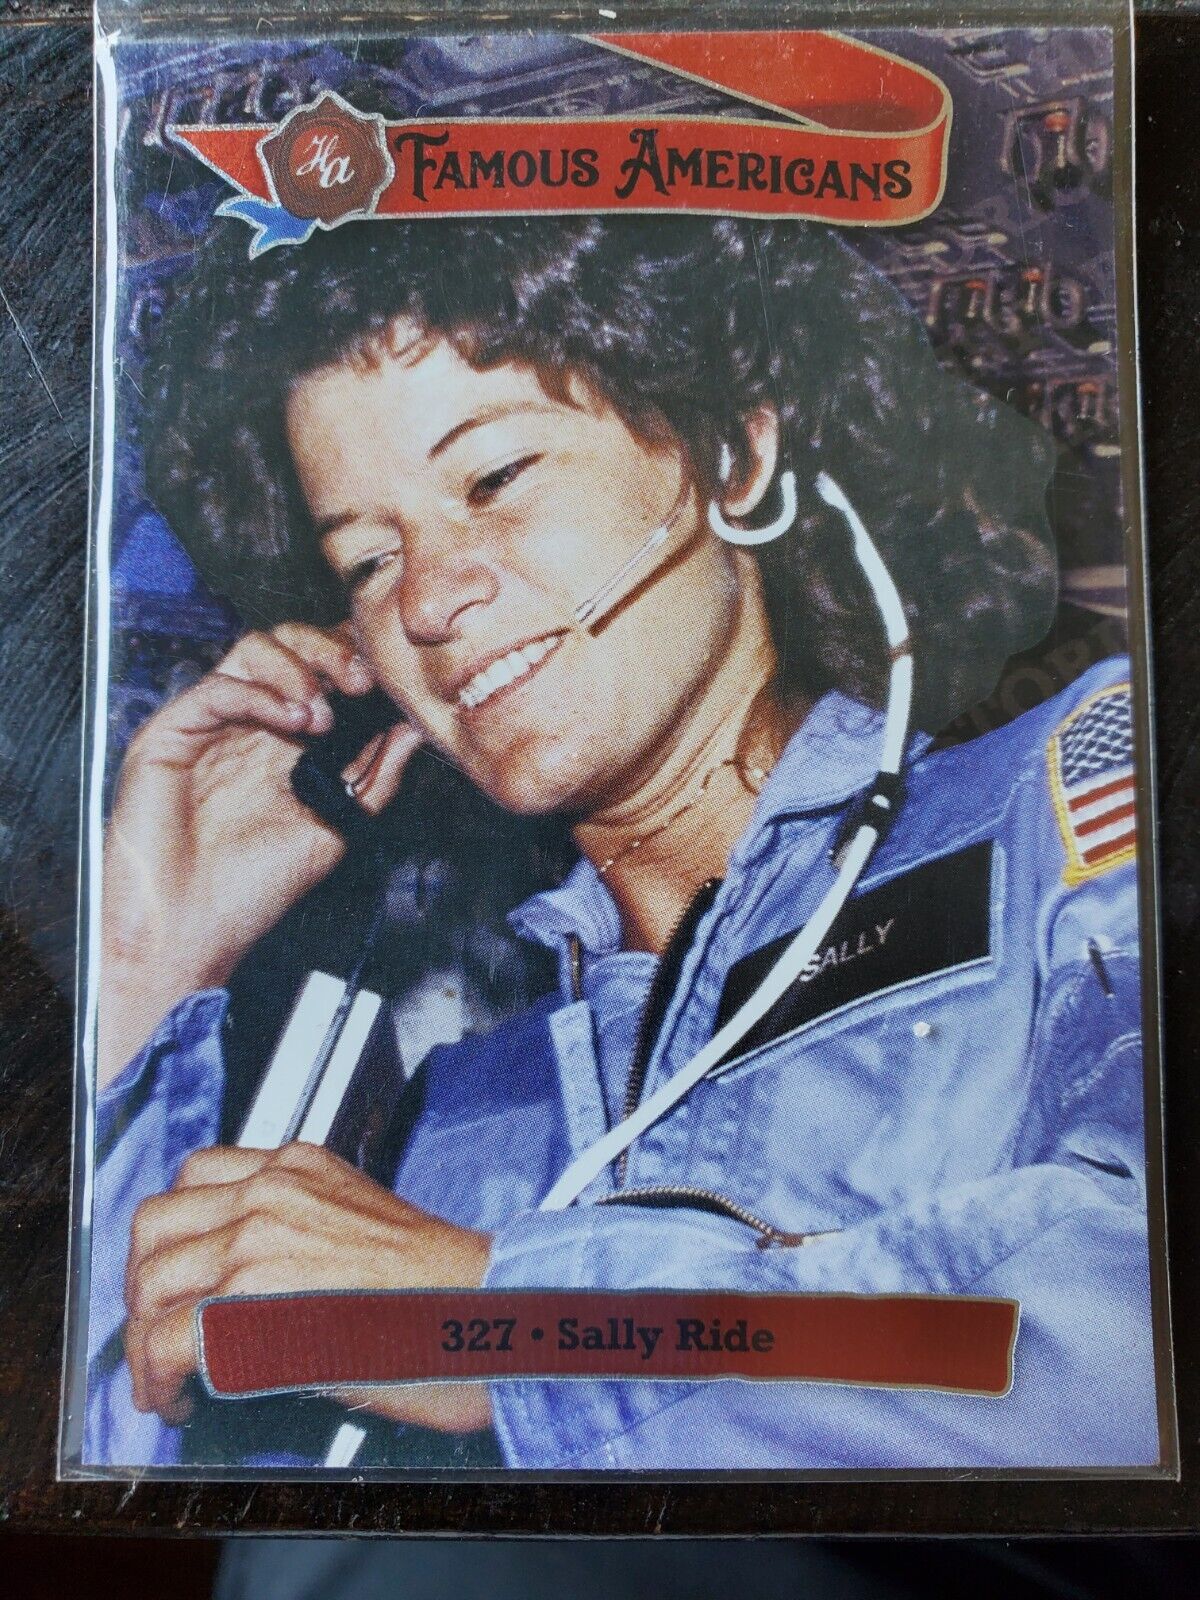 2021 Historic Auto Famous Americans Sally Ride #327 /25 MINT